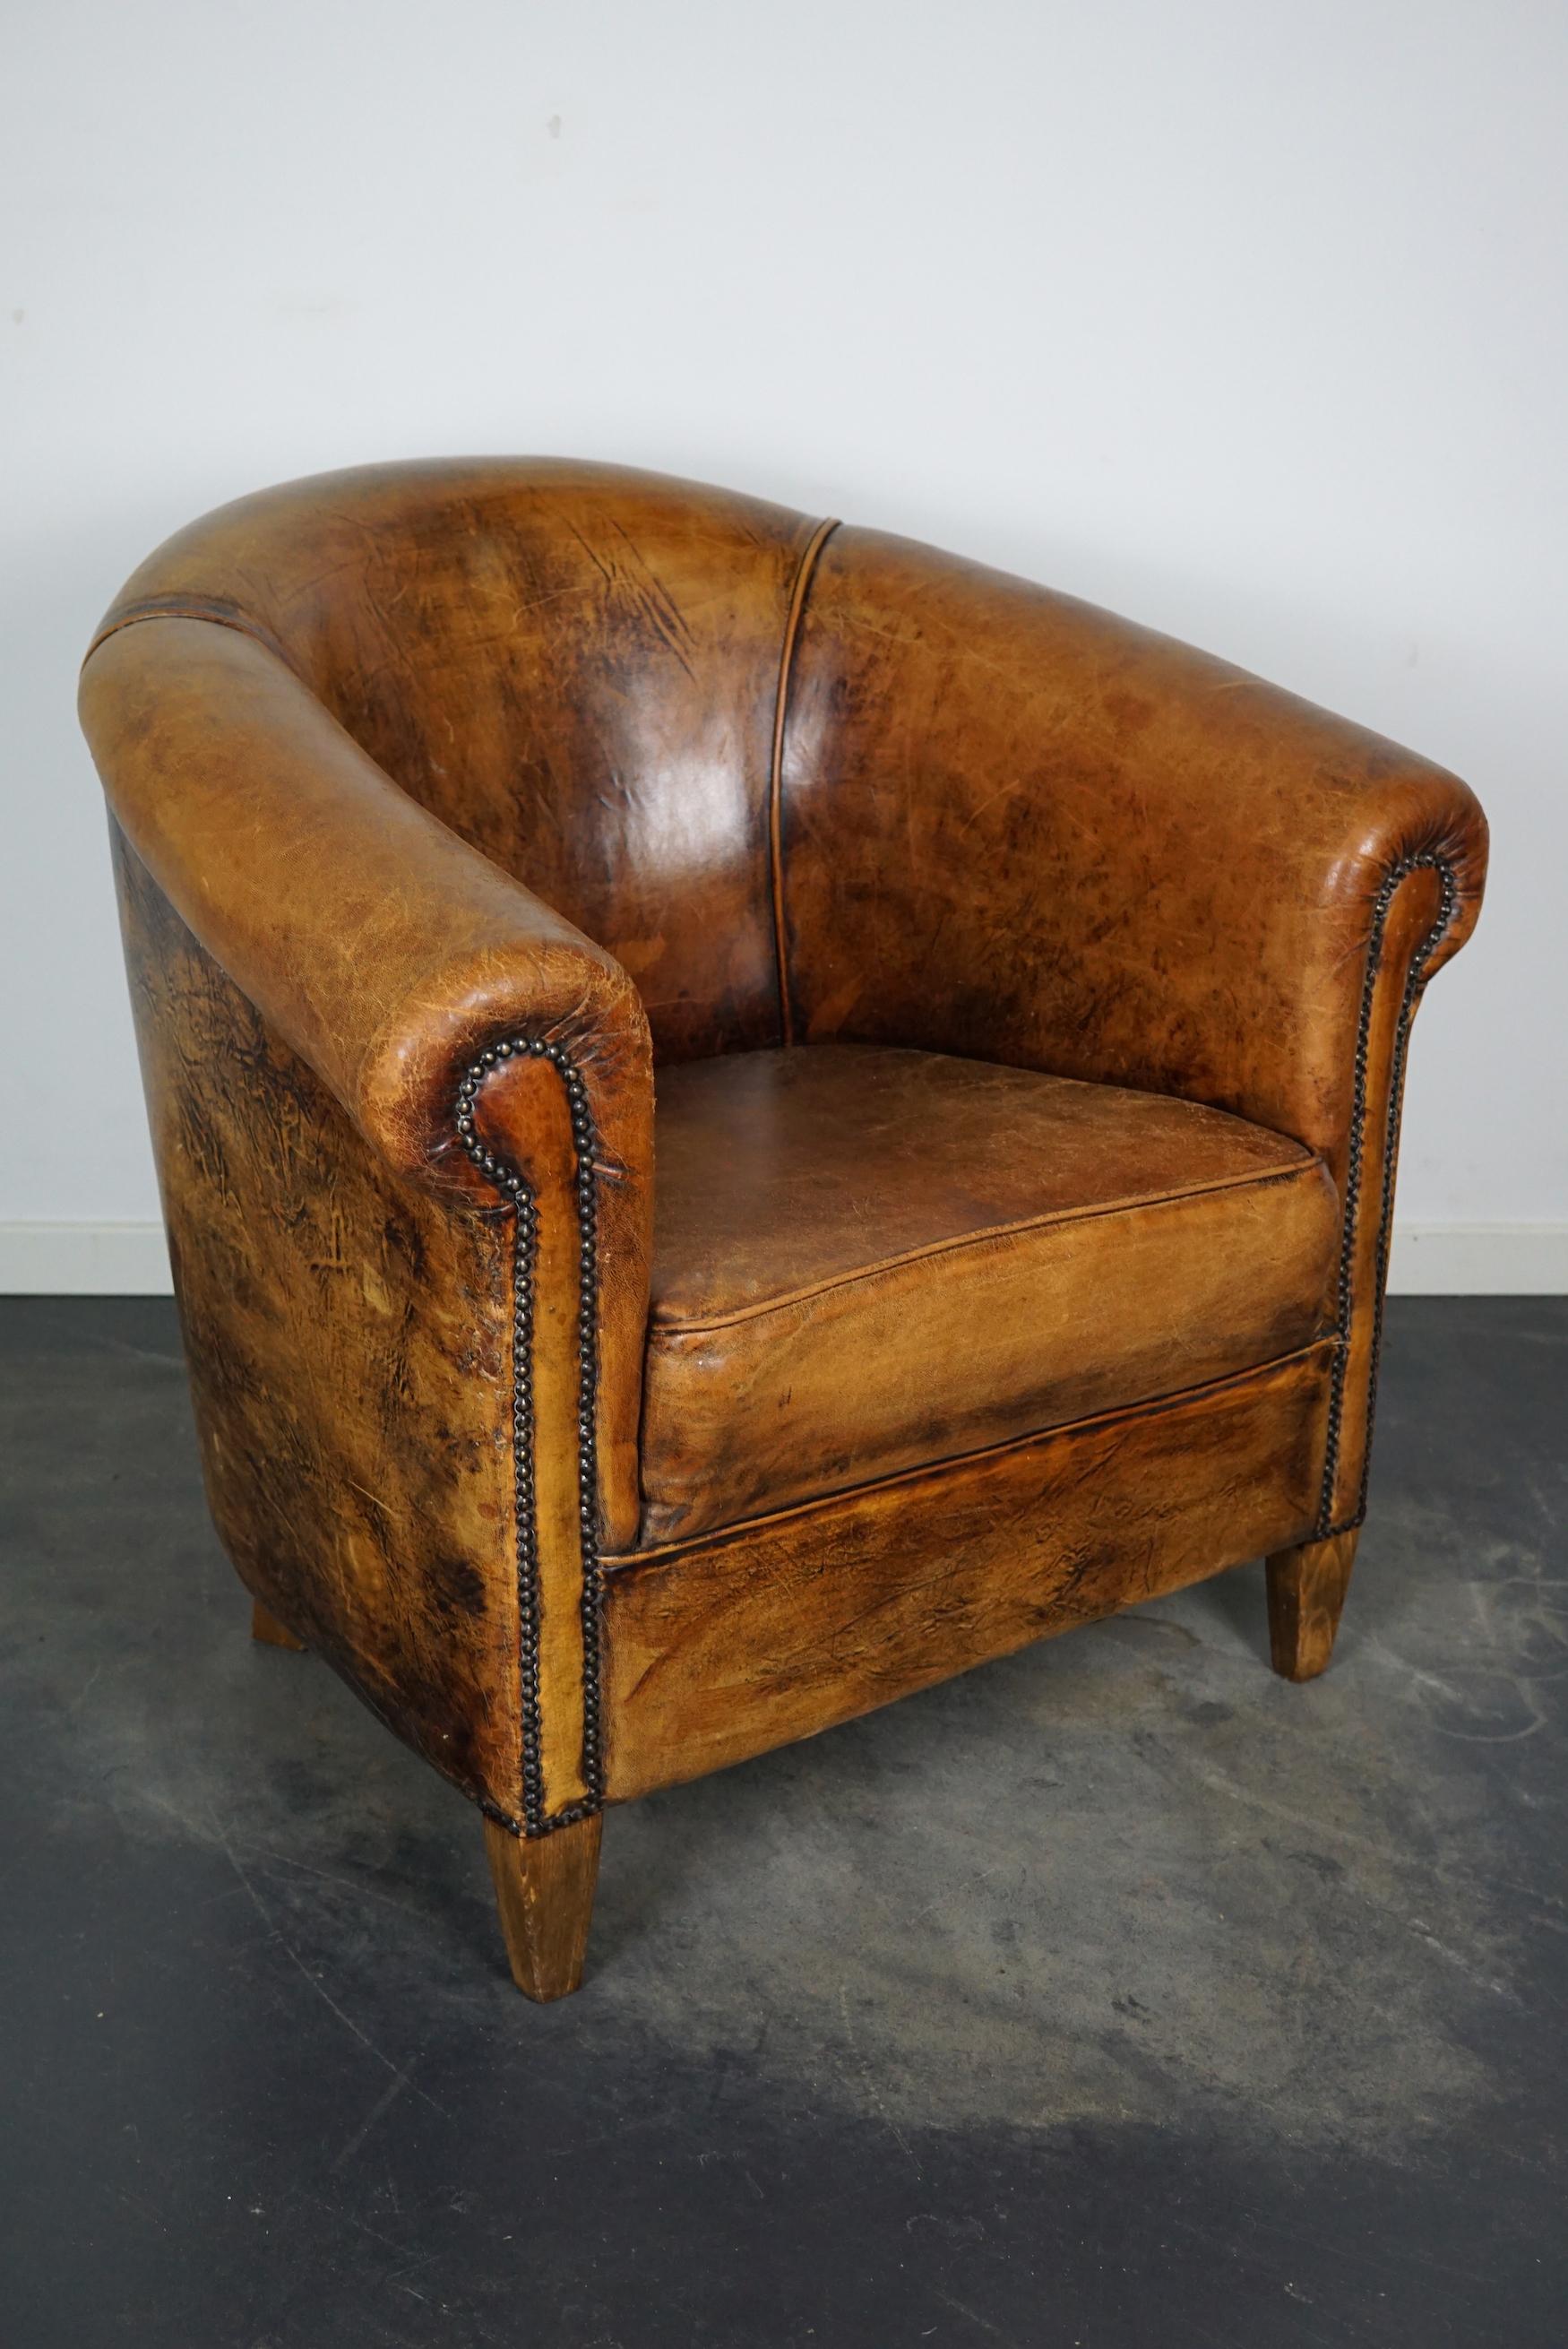 cognac chairs for sale